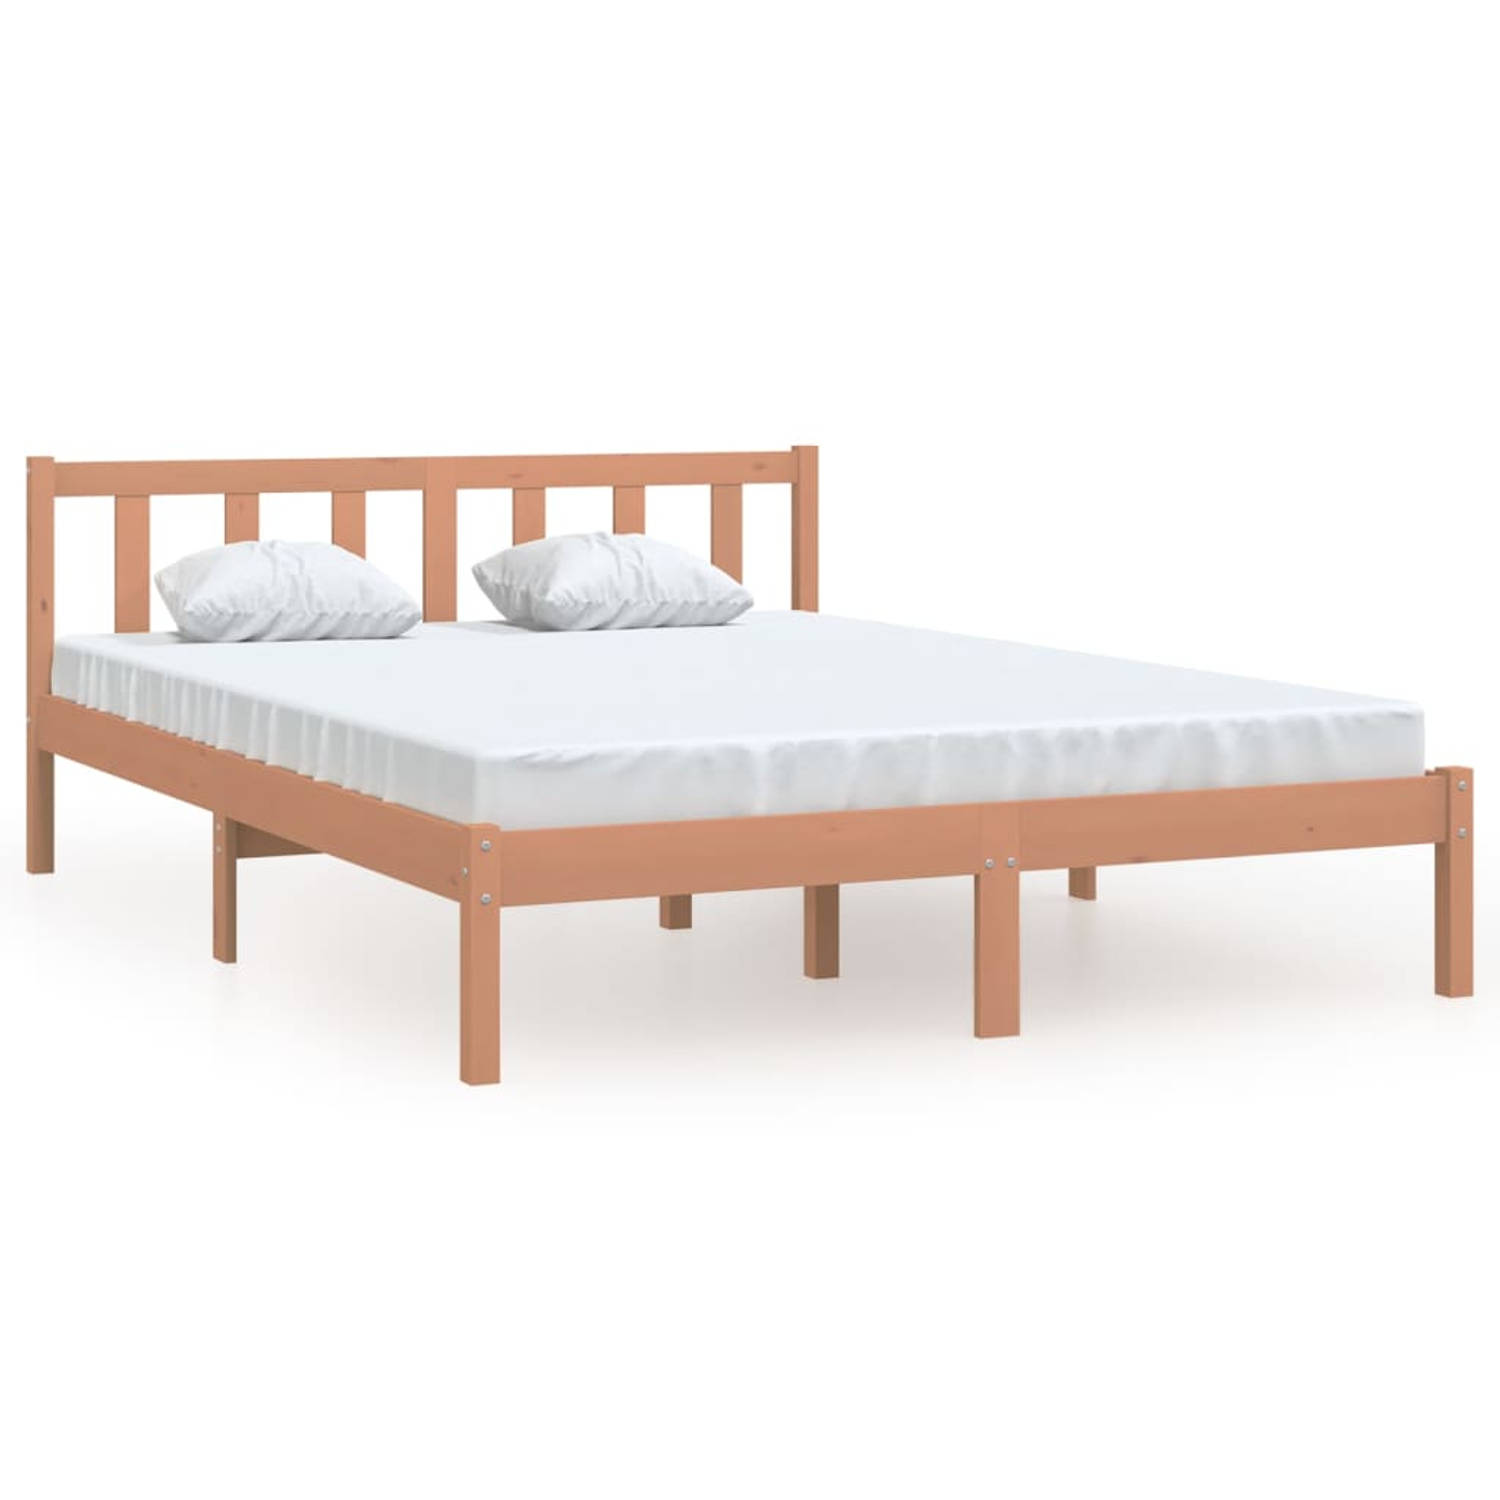 The Living Store Bedframe massief grenenhout honingbruin 140x200 cm - Bedframe - Bedframe - Bed Frame - Bed Frames - Bed - Bedden - 1-persoonsbed - 1-persoonsbedden - Eenpersoons B